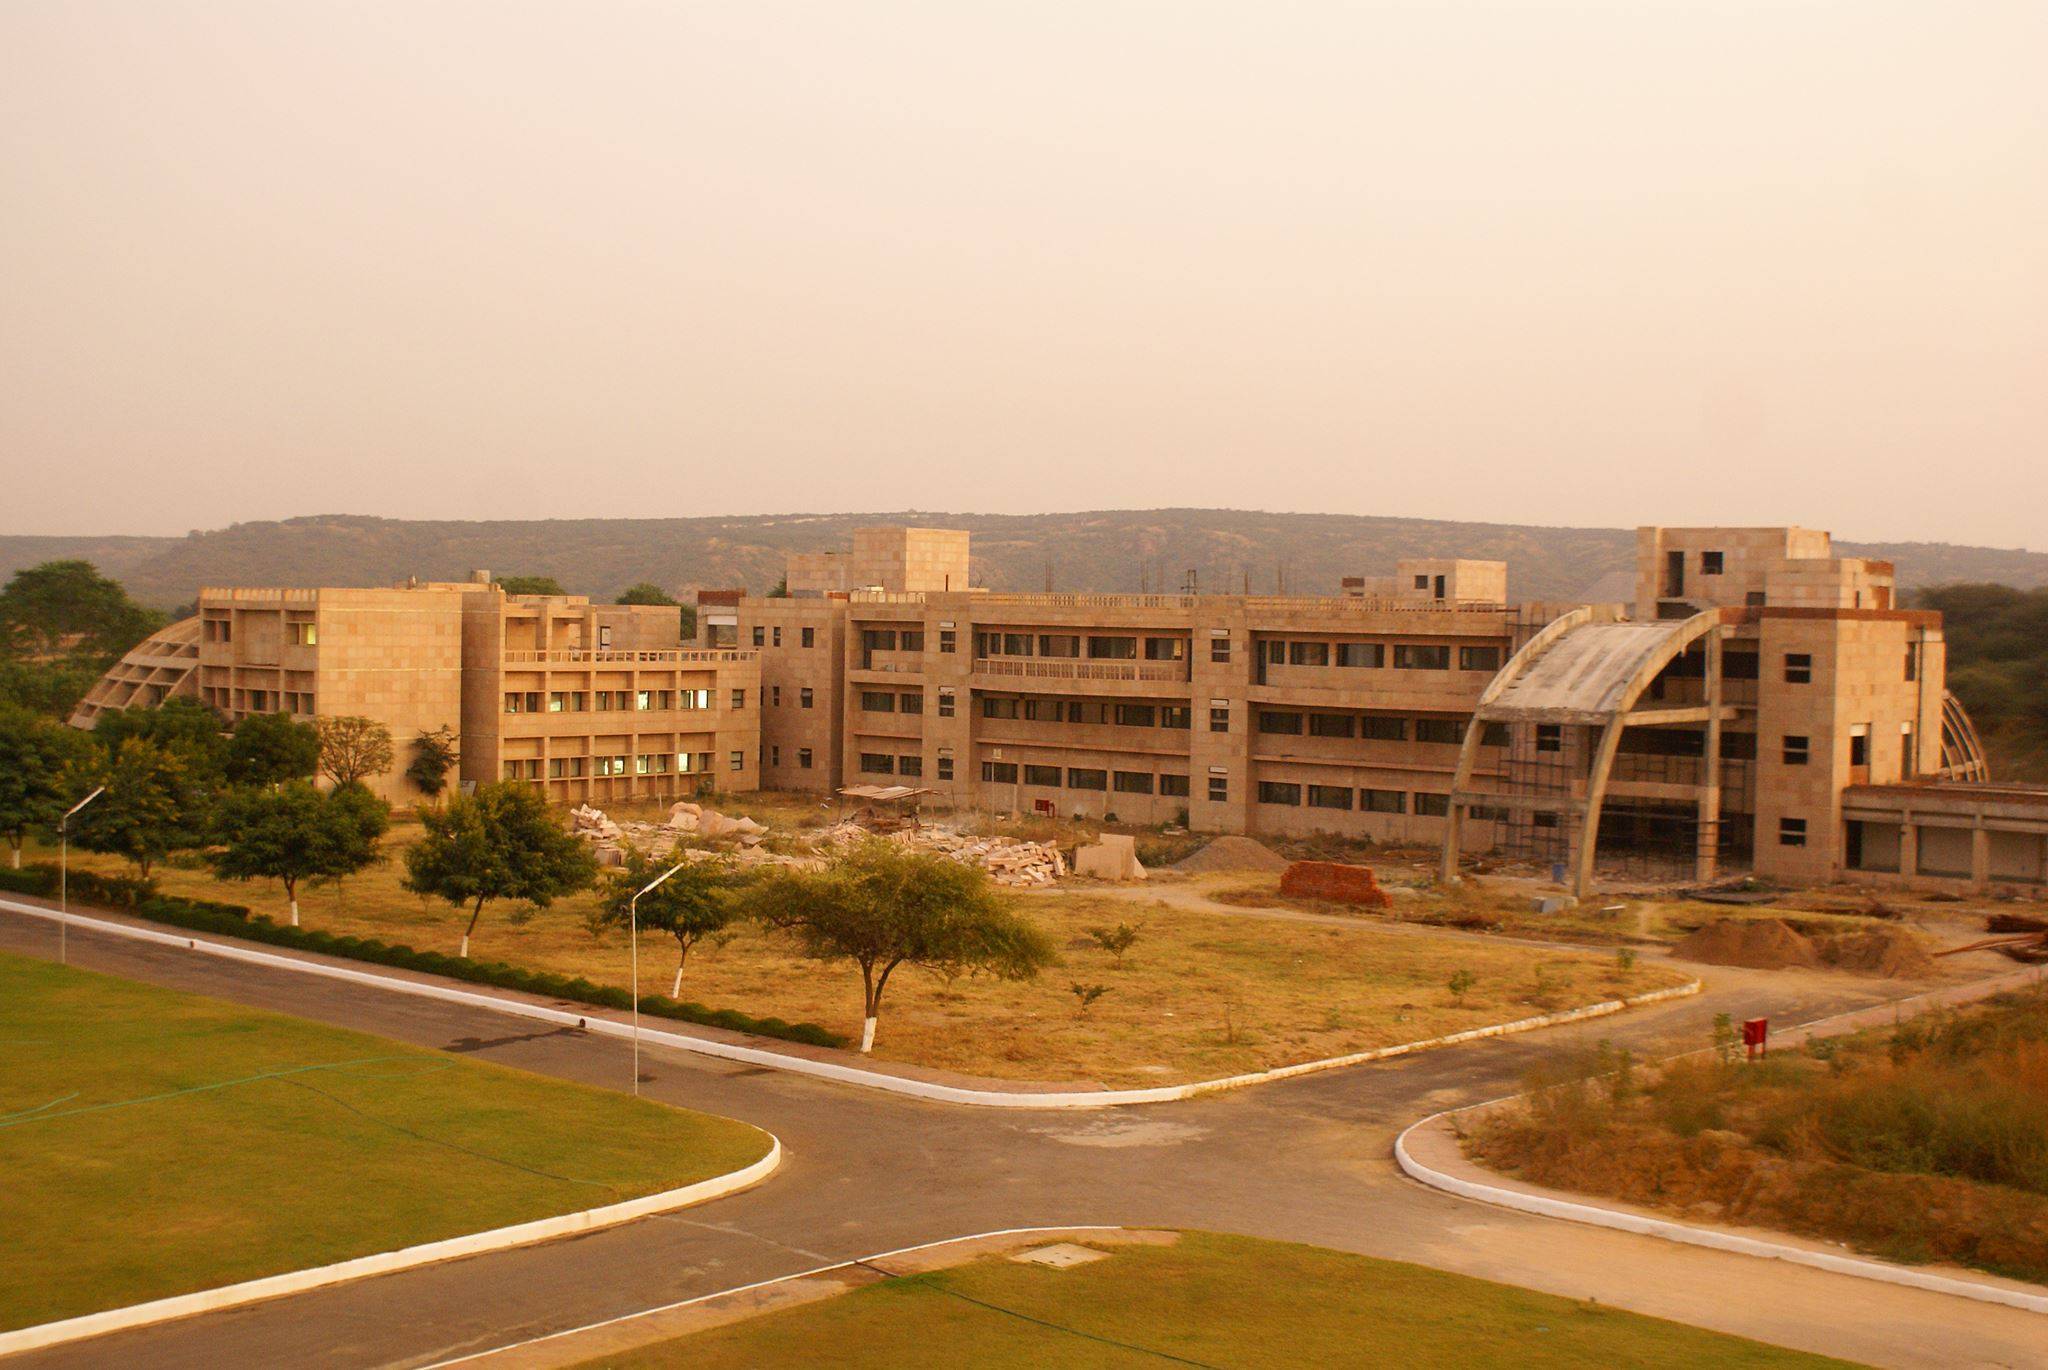 National Brain Research Centre